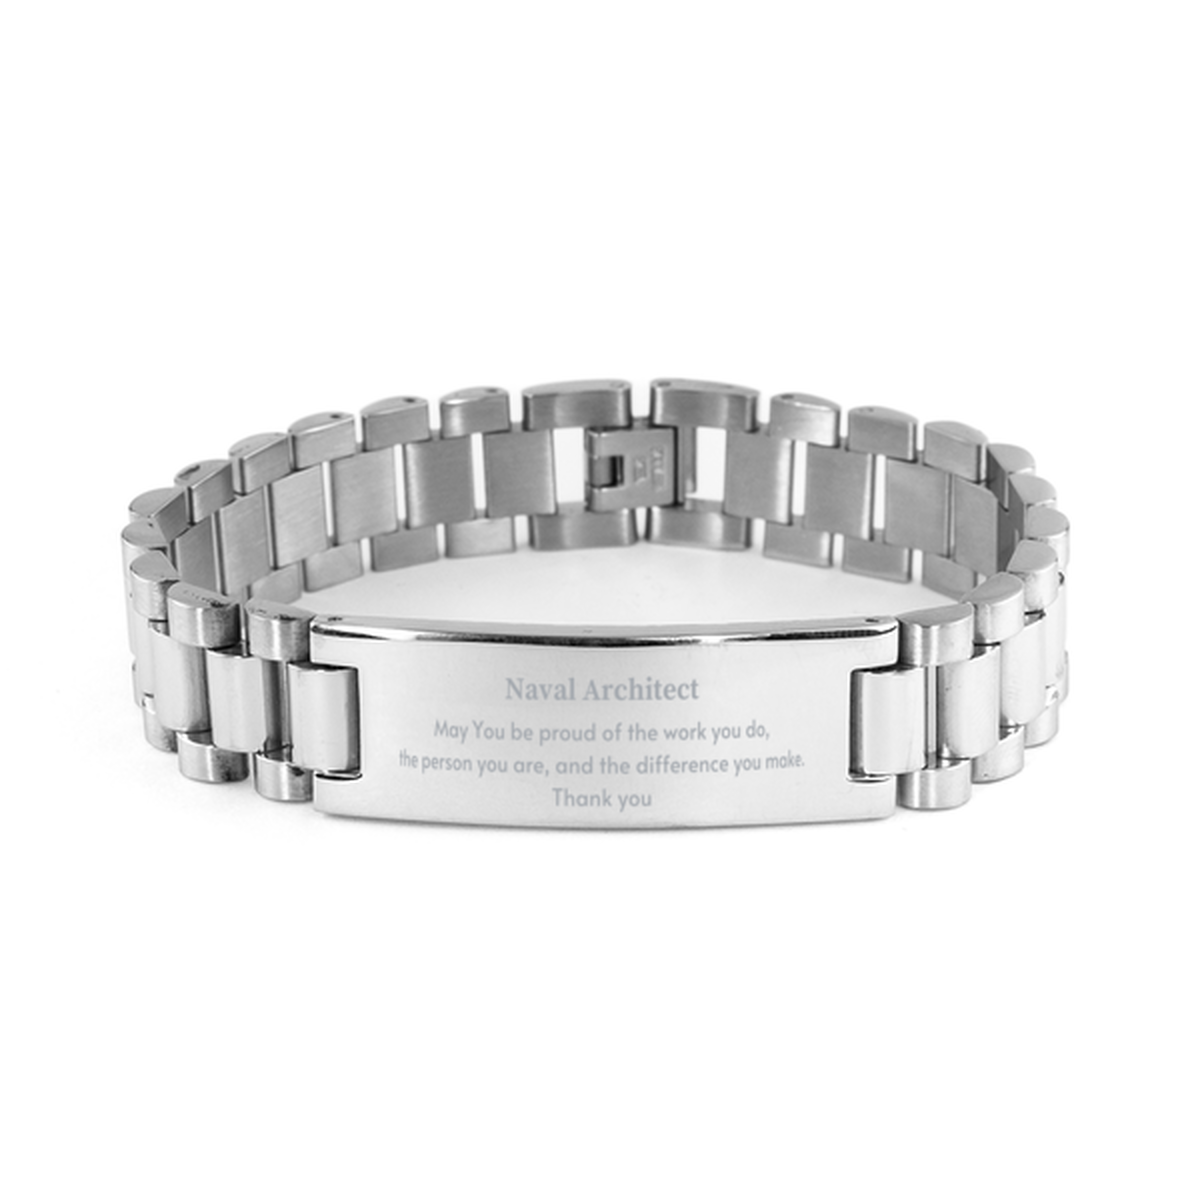 Heartwarming Ladder Stainless Steel Bracelet Retirement Coworkers Gifts for Naval Architect, Naval Architect May You be proud of the work you do, the person you are Gifts for Boss Men Women Friends